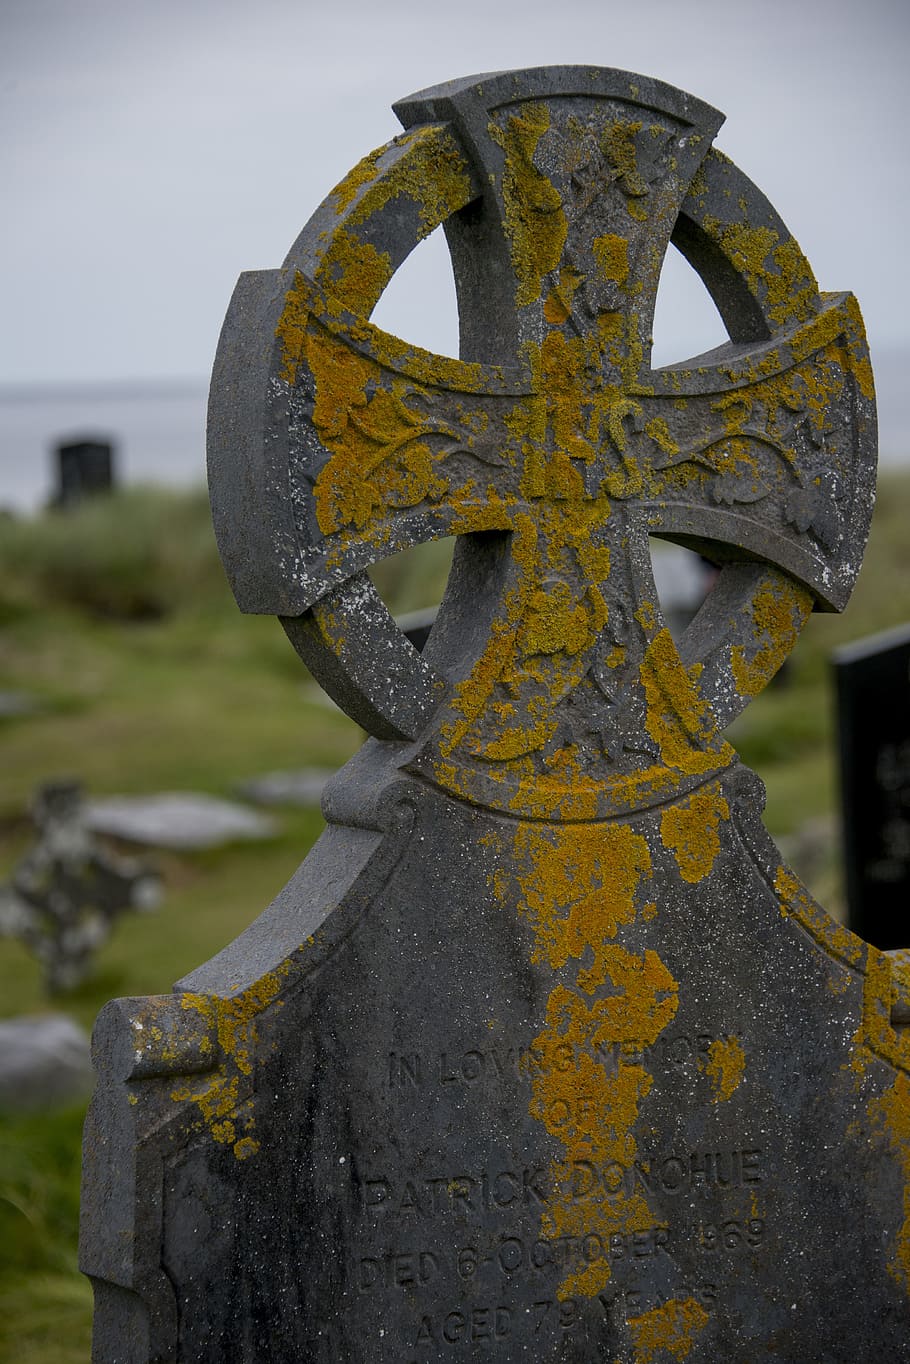 Grave, Celtic Cross, Cemetery, Ireland, inisheer, aran islands, moss, old, close-up, day